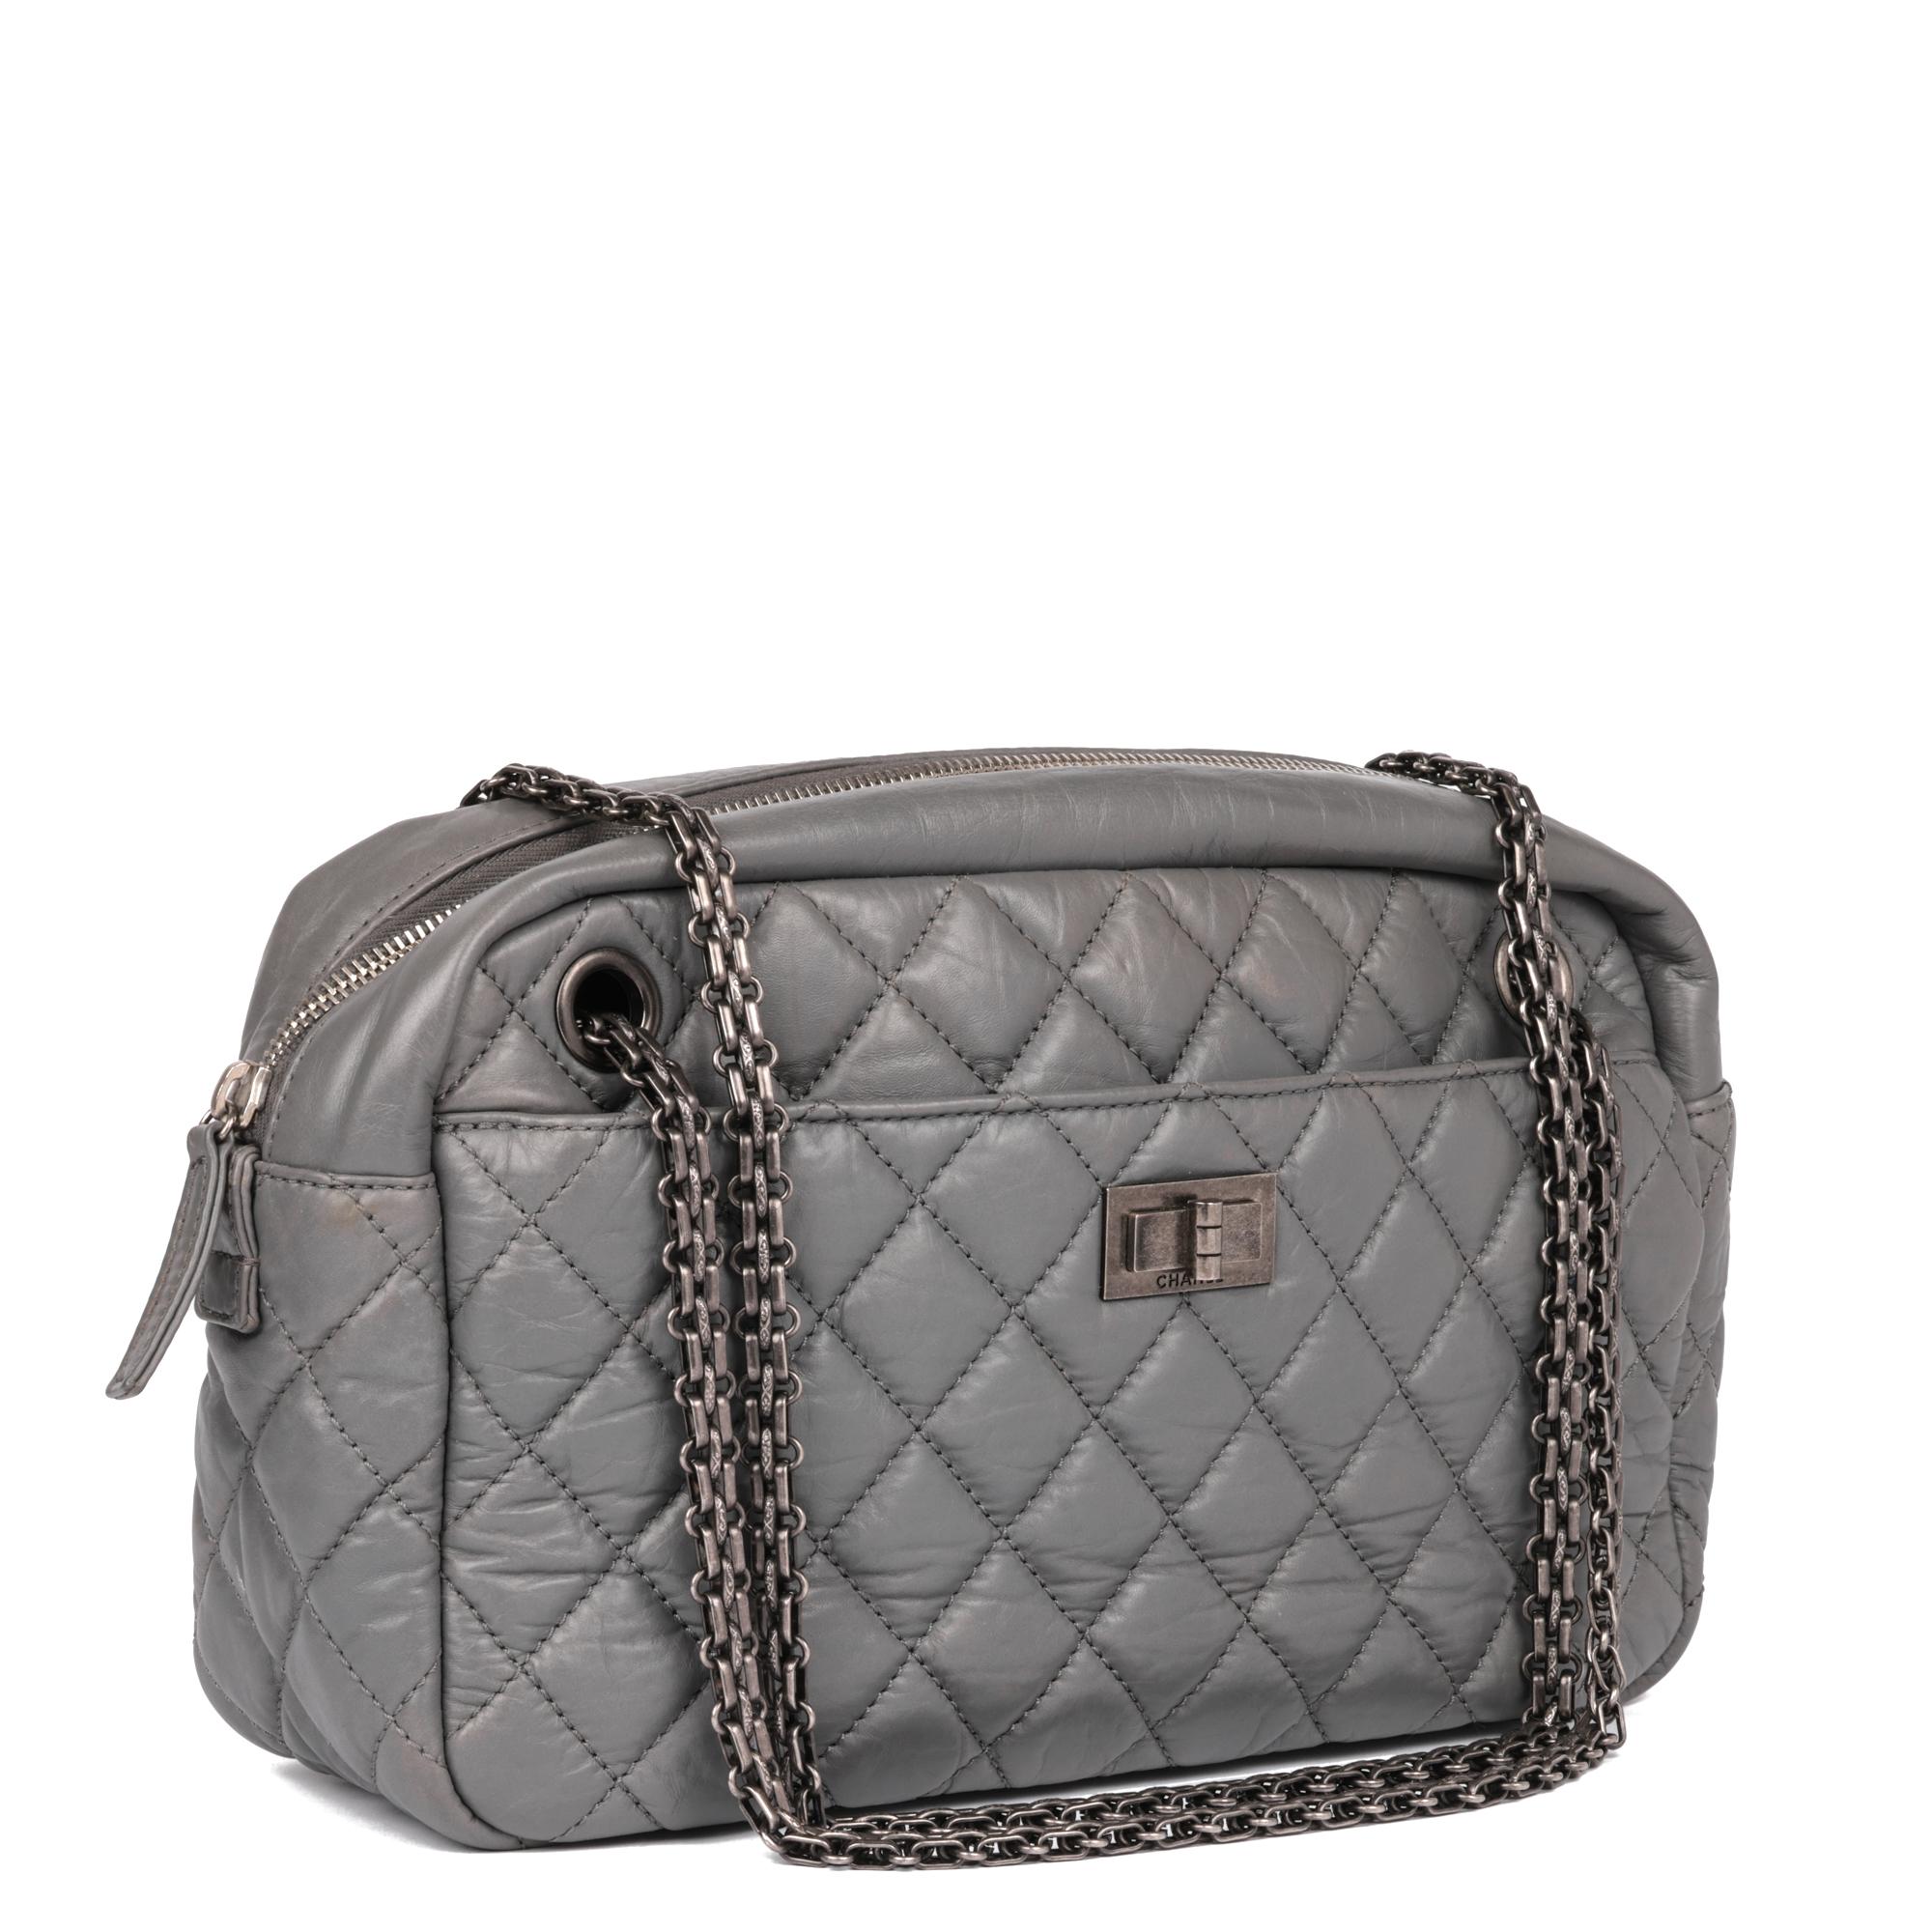 CHANEL
Grey Aged Calfskin Leather Medium Reissue Camera Bag

Xupes Reference: HB5041
Serial Number: 12366200
Age (Circa): 2008
Accompanied By: Chanel Dust Bag, Box, Authenticity Card
Authenticity Details: Authenticity Card, Serial Sticker (Made in